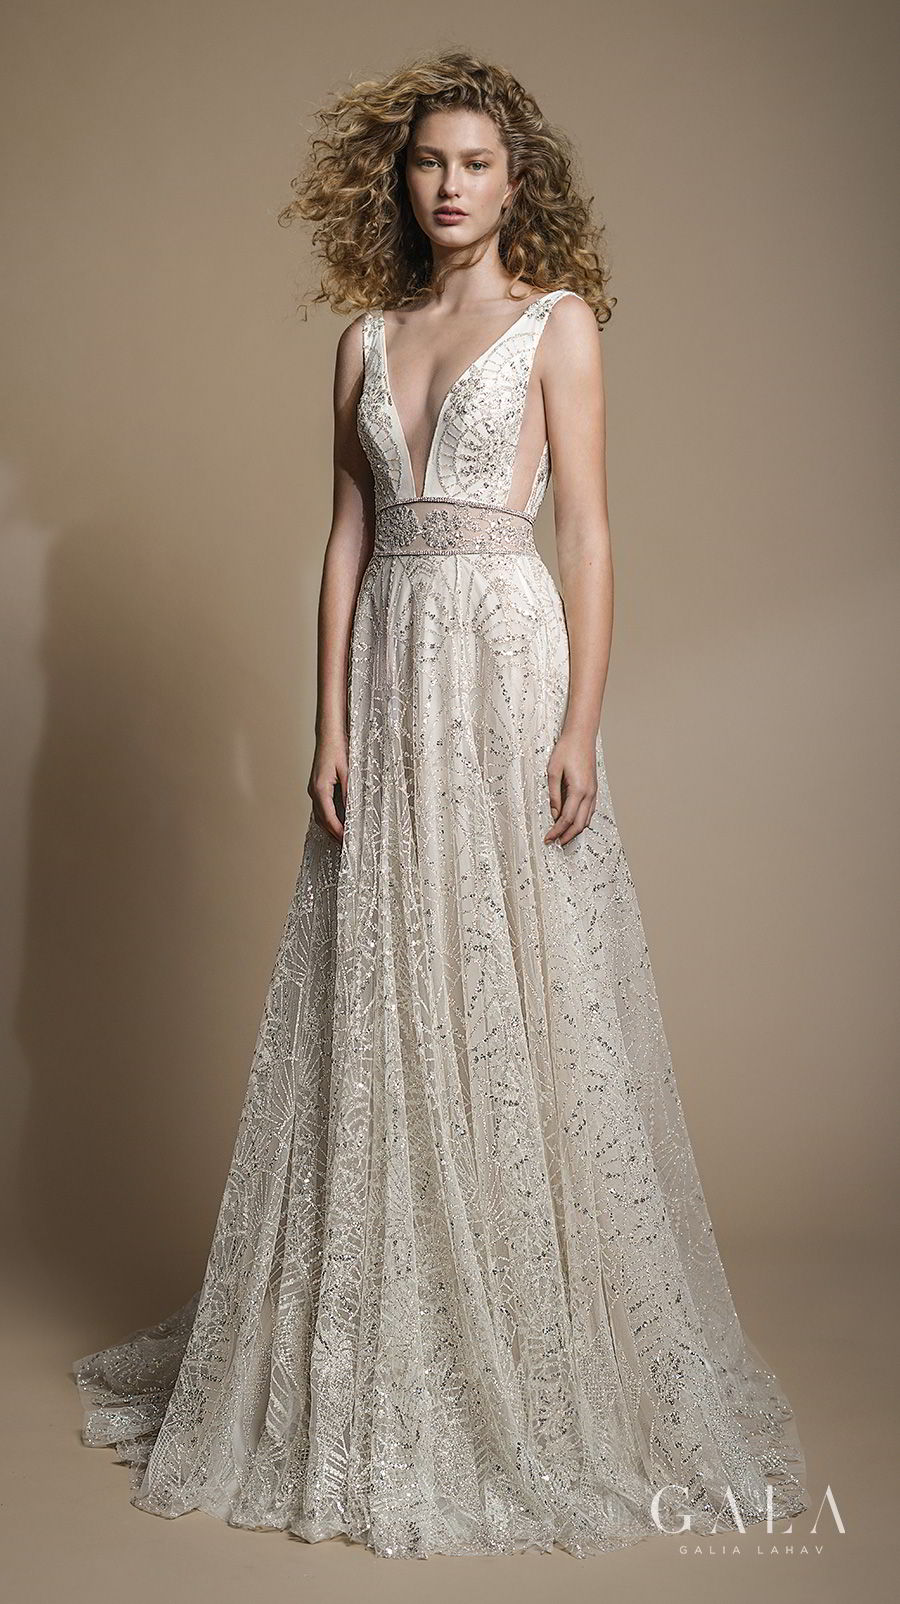 GALA by Galia Lahav Collection No. VI — These Wedding Dresses are the ...